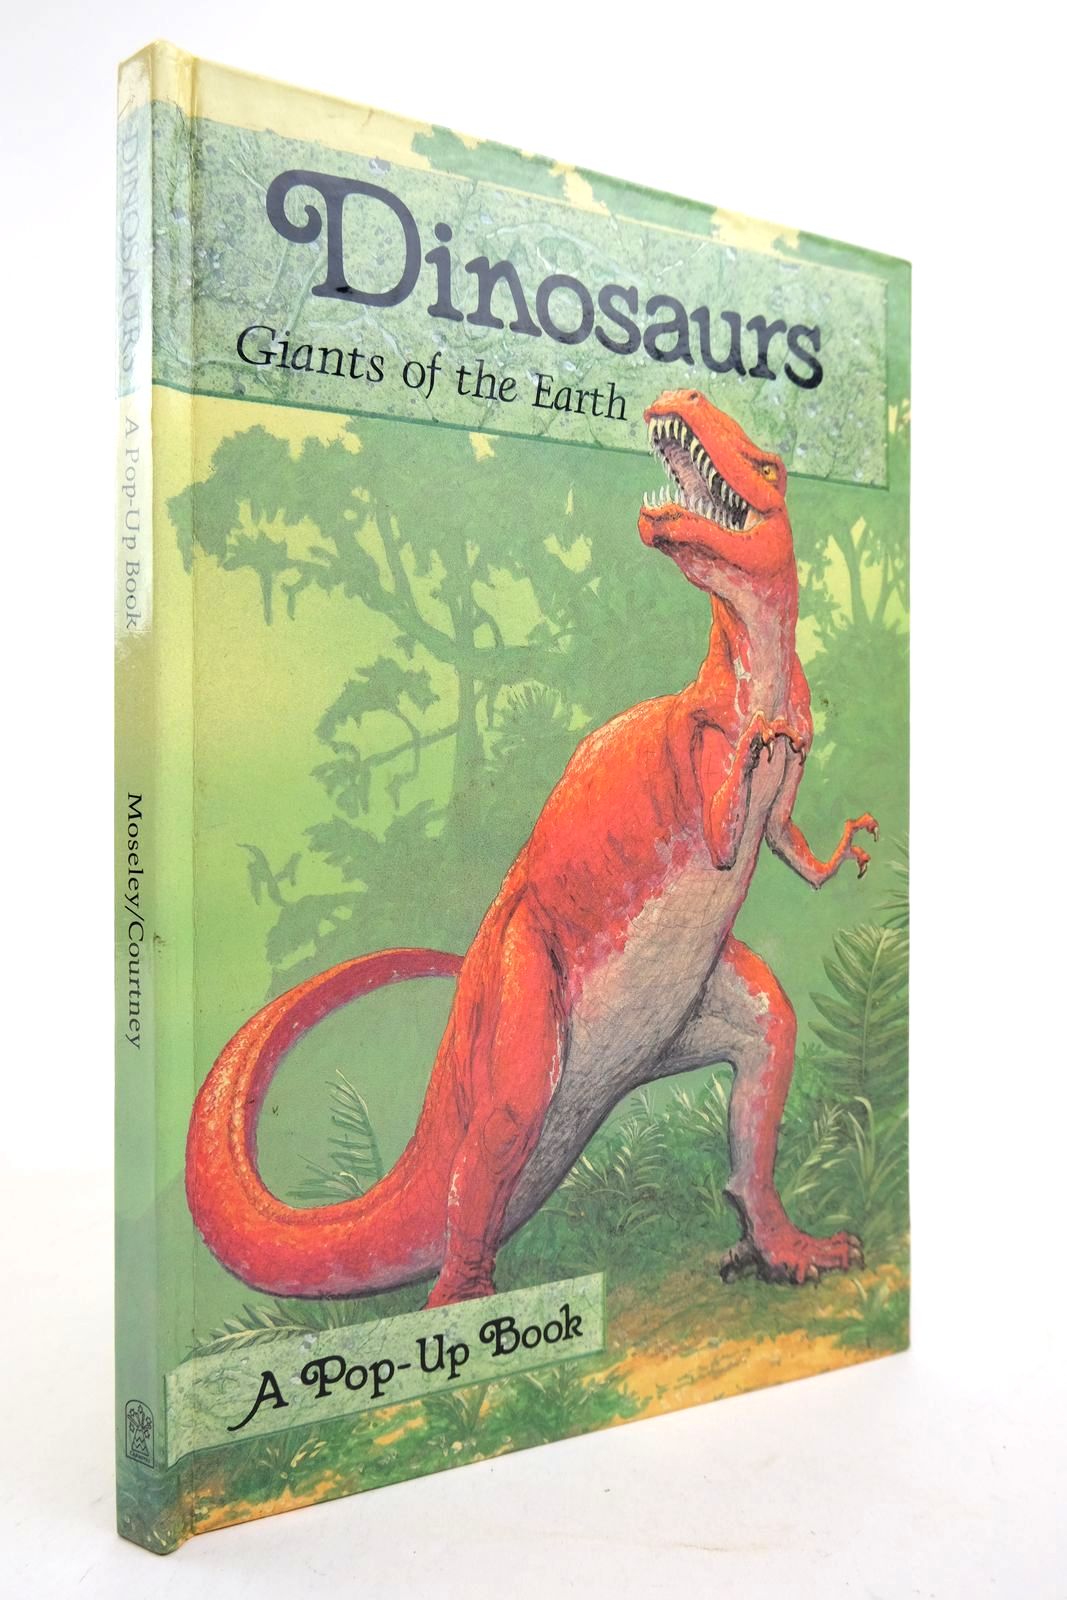 Photo of DINOSAURS GIANTS OF THE EARTH illustrated by Moseley, Keith Courtney, Richard published by Carnival (STOCK CODE: 2140832)  for sale by Stella & Rose's Books